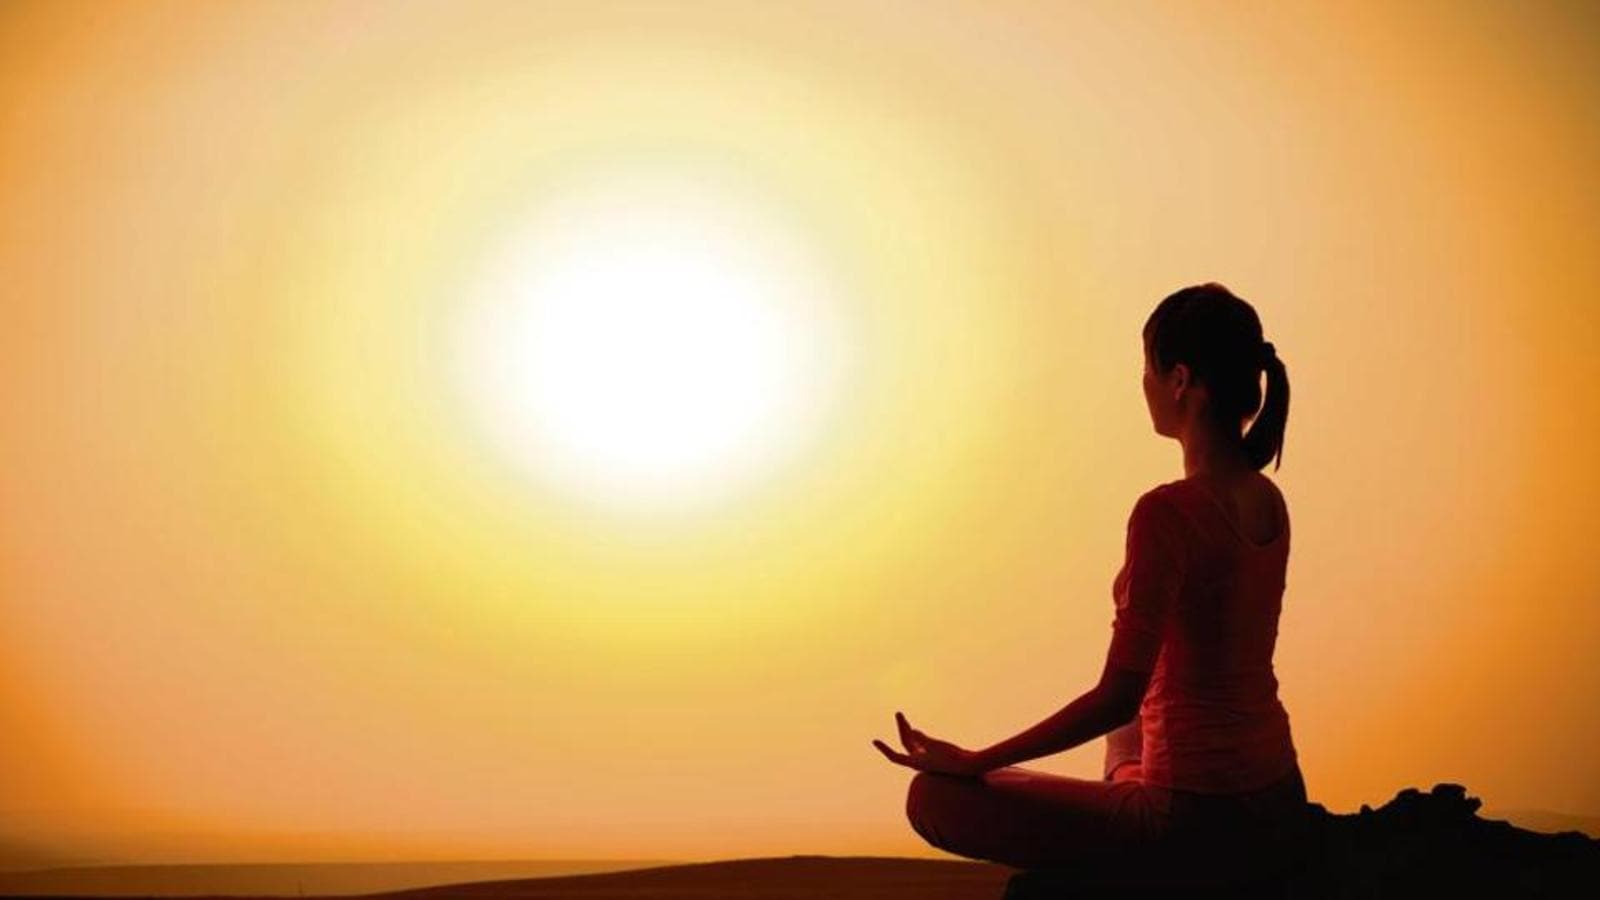  The image is of a woman meditating in a yoga pose with a sun rising over the horizon.